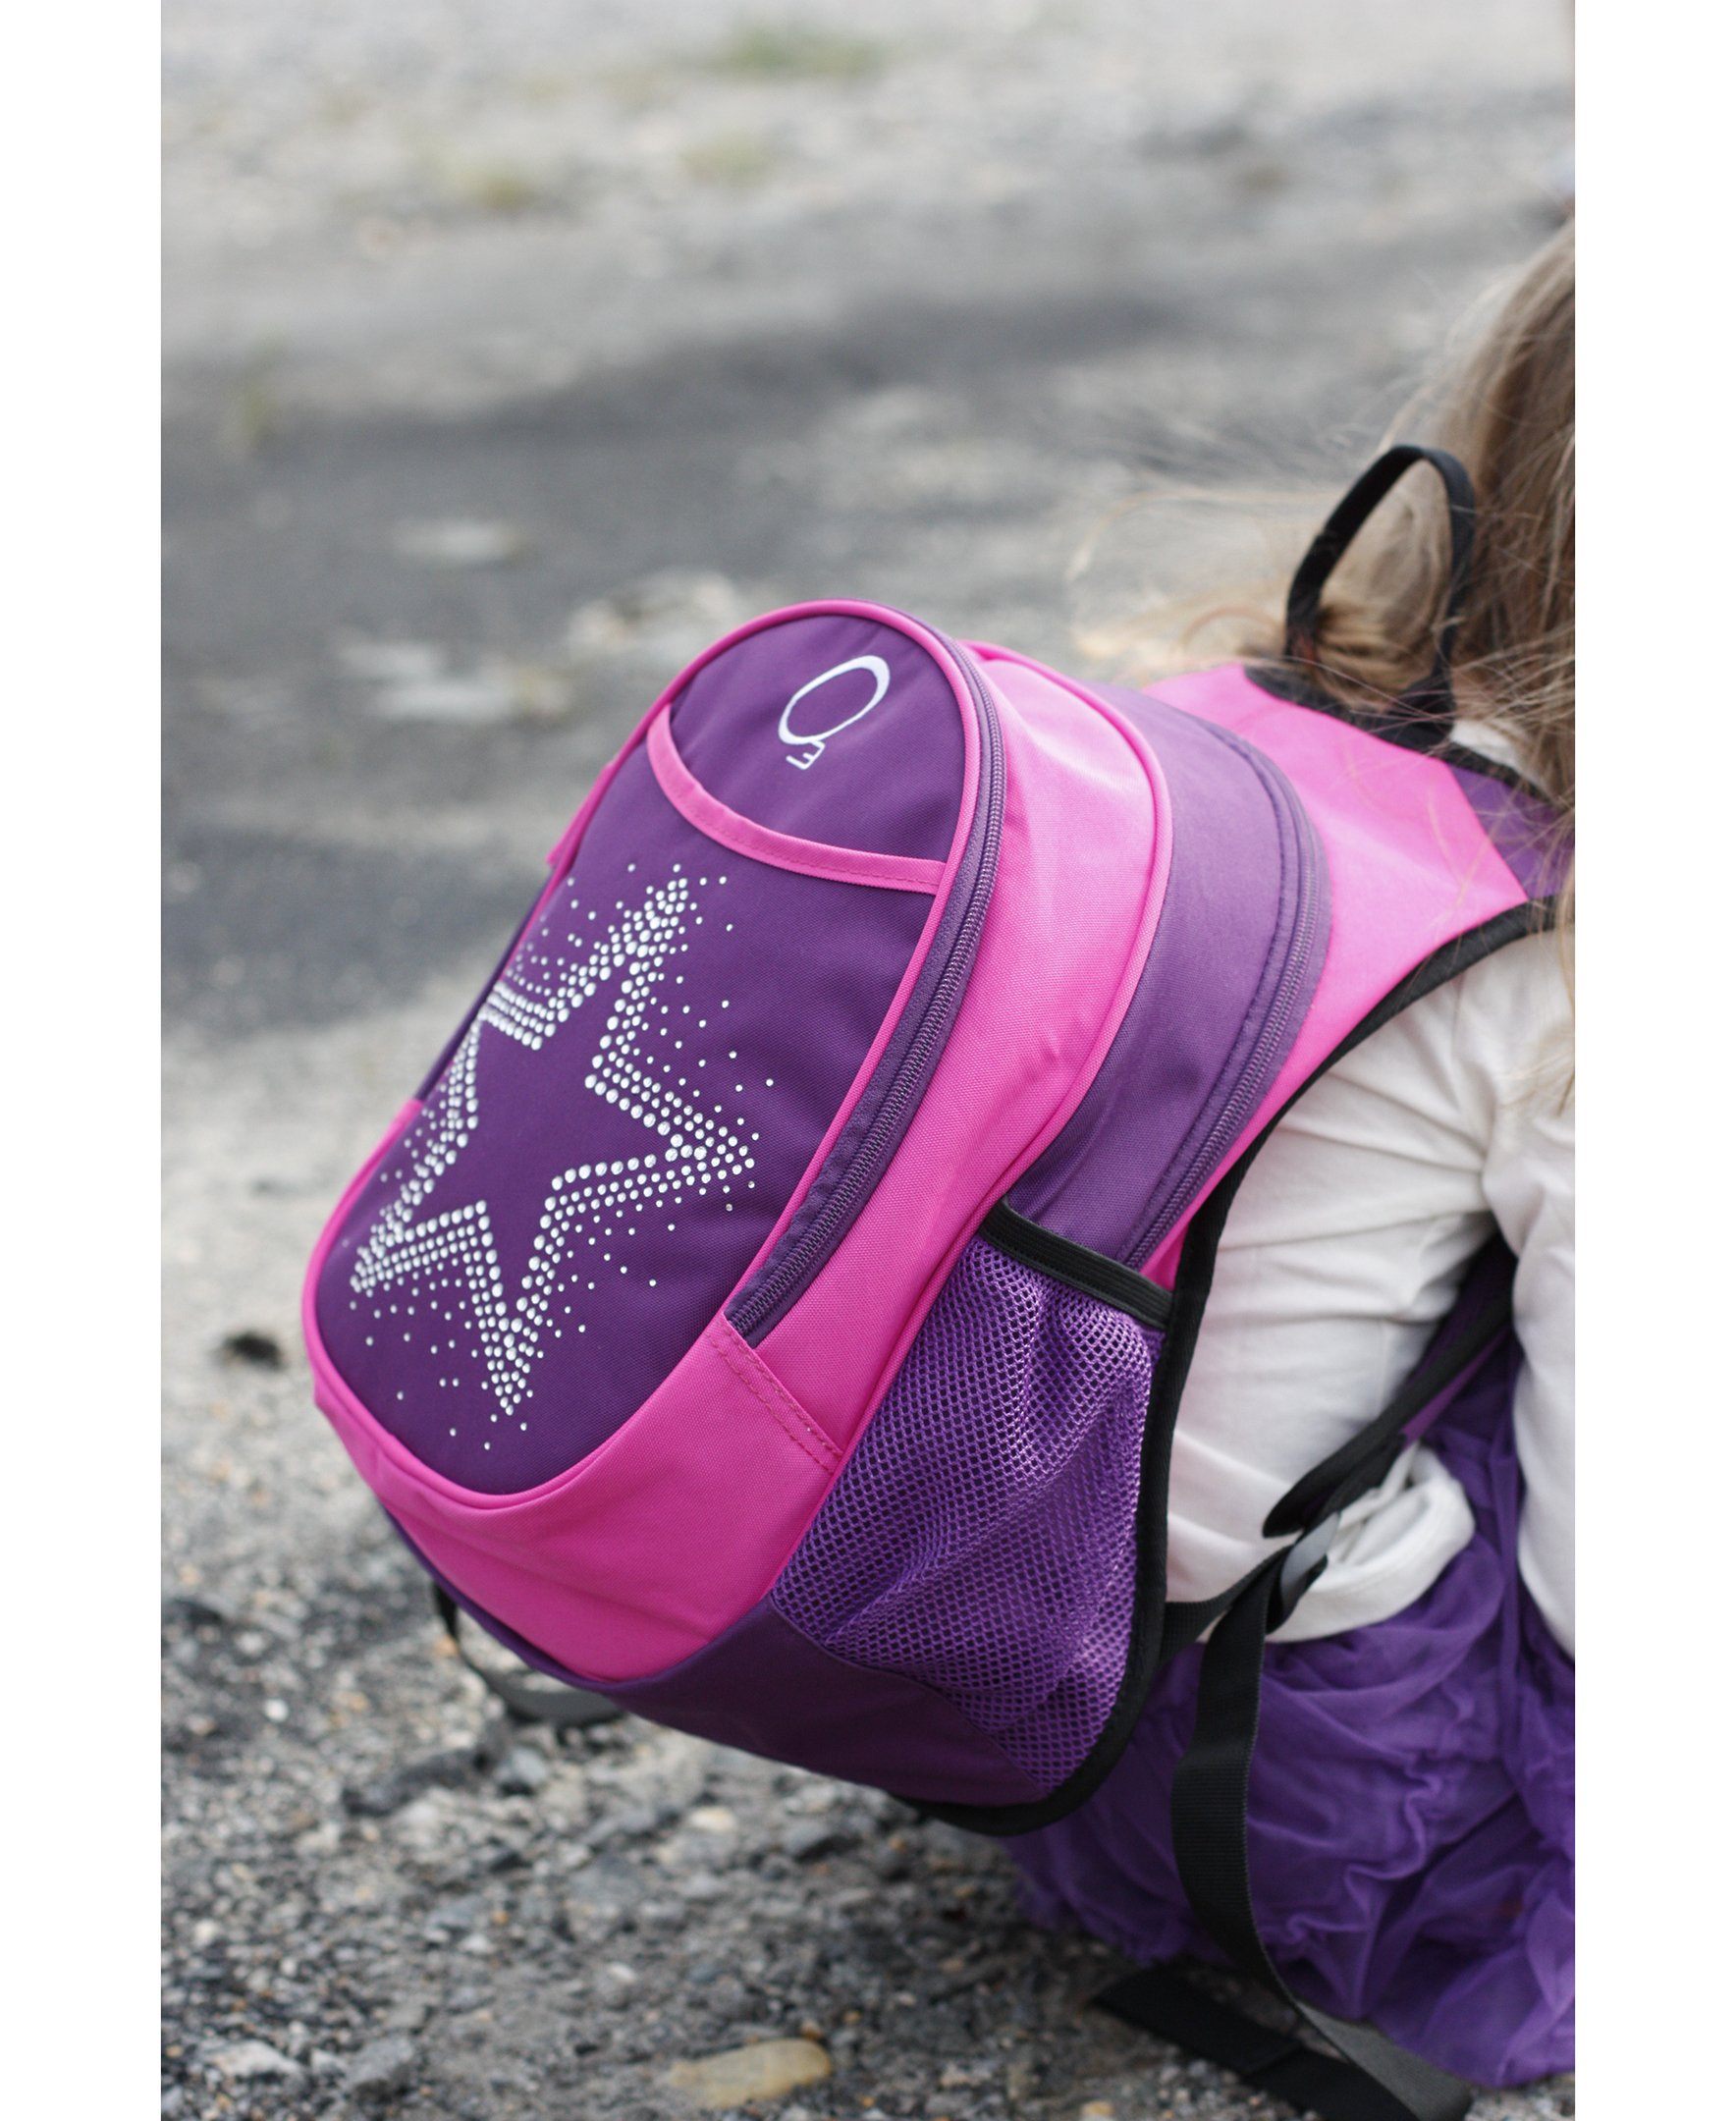 O3KCBP003 Obersee Mini Preschool All-in-One Backpack for Toddlers and Kids with integrated Insulated Cooler | Bling Rhinestone Star - image 2 of 5